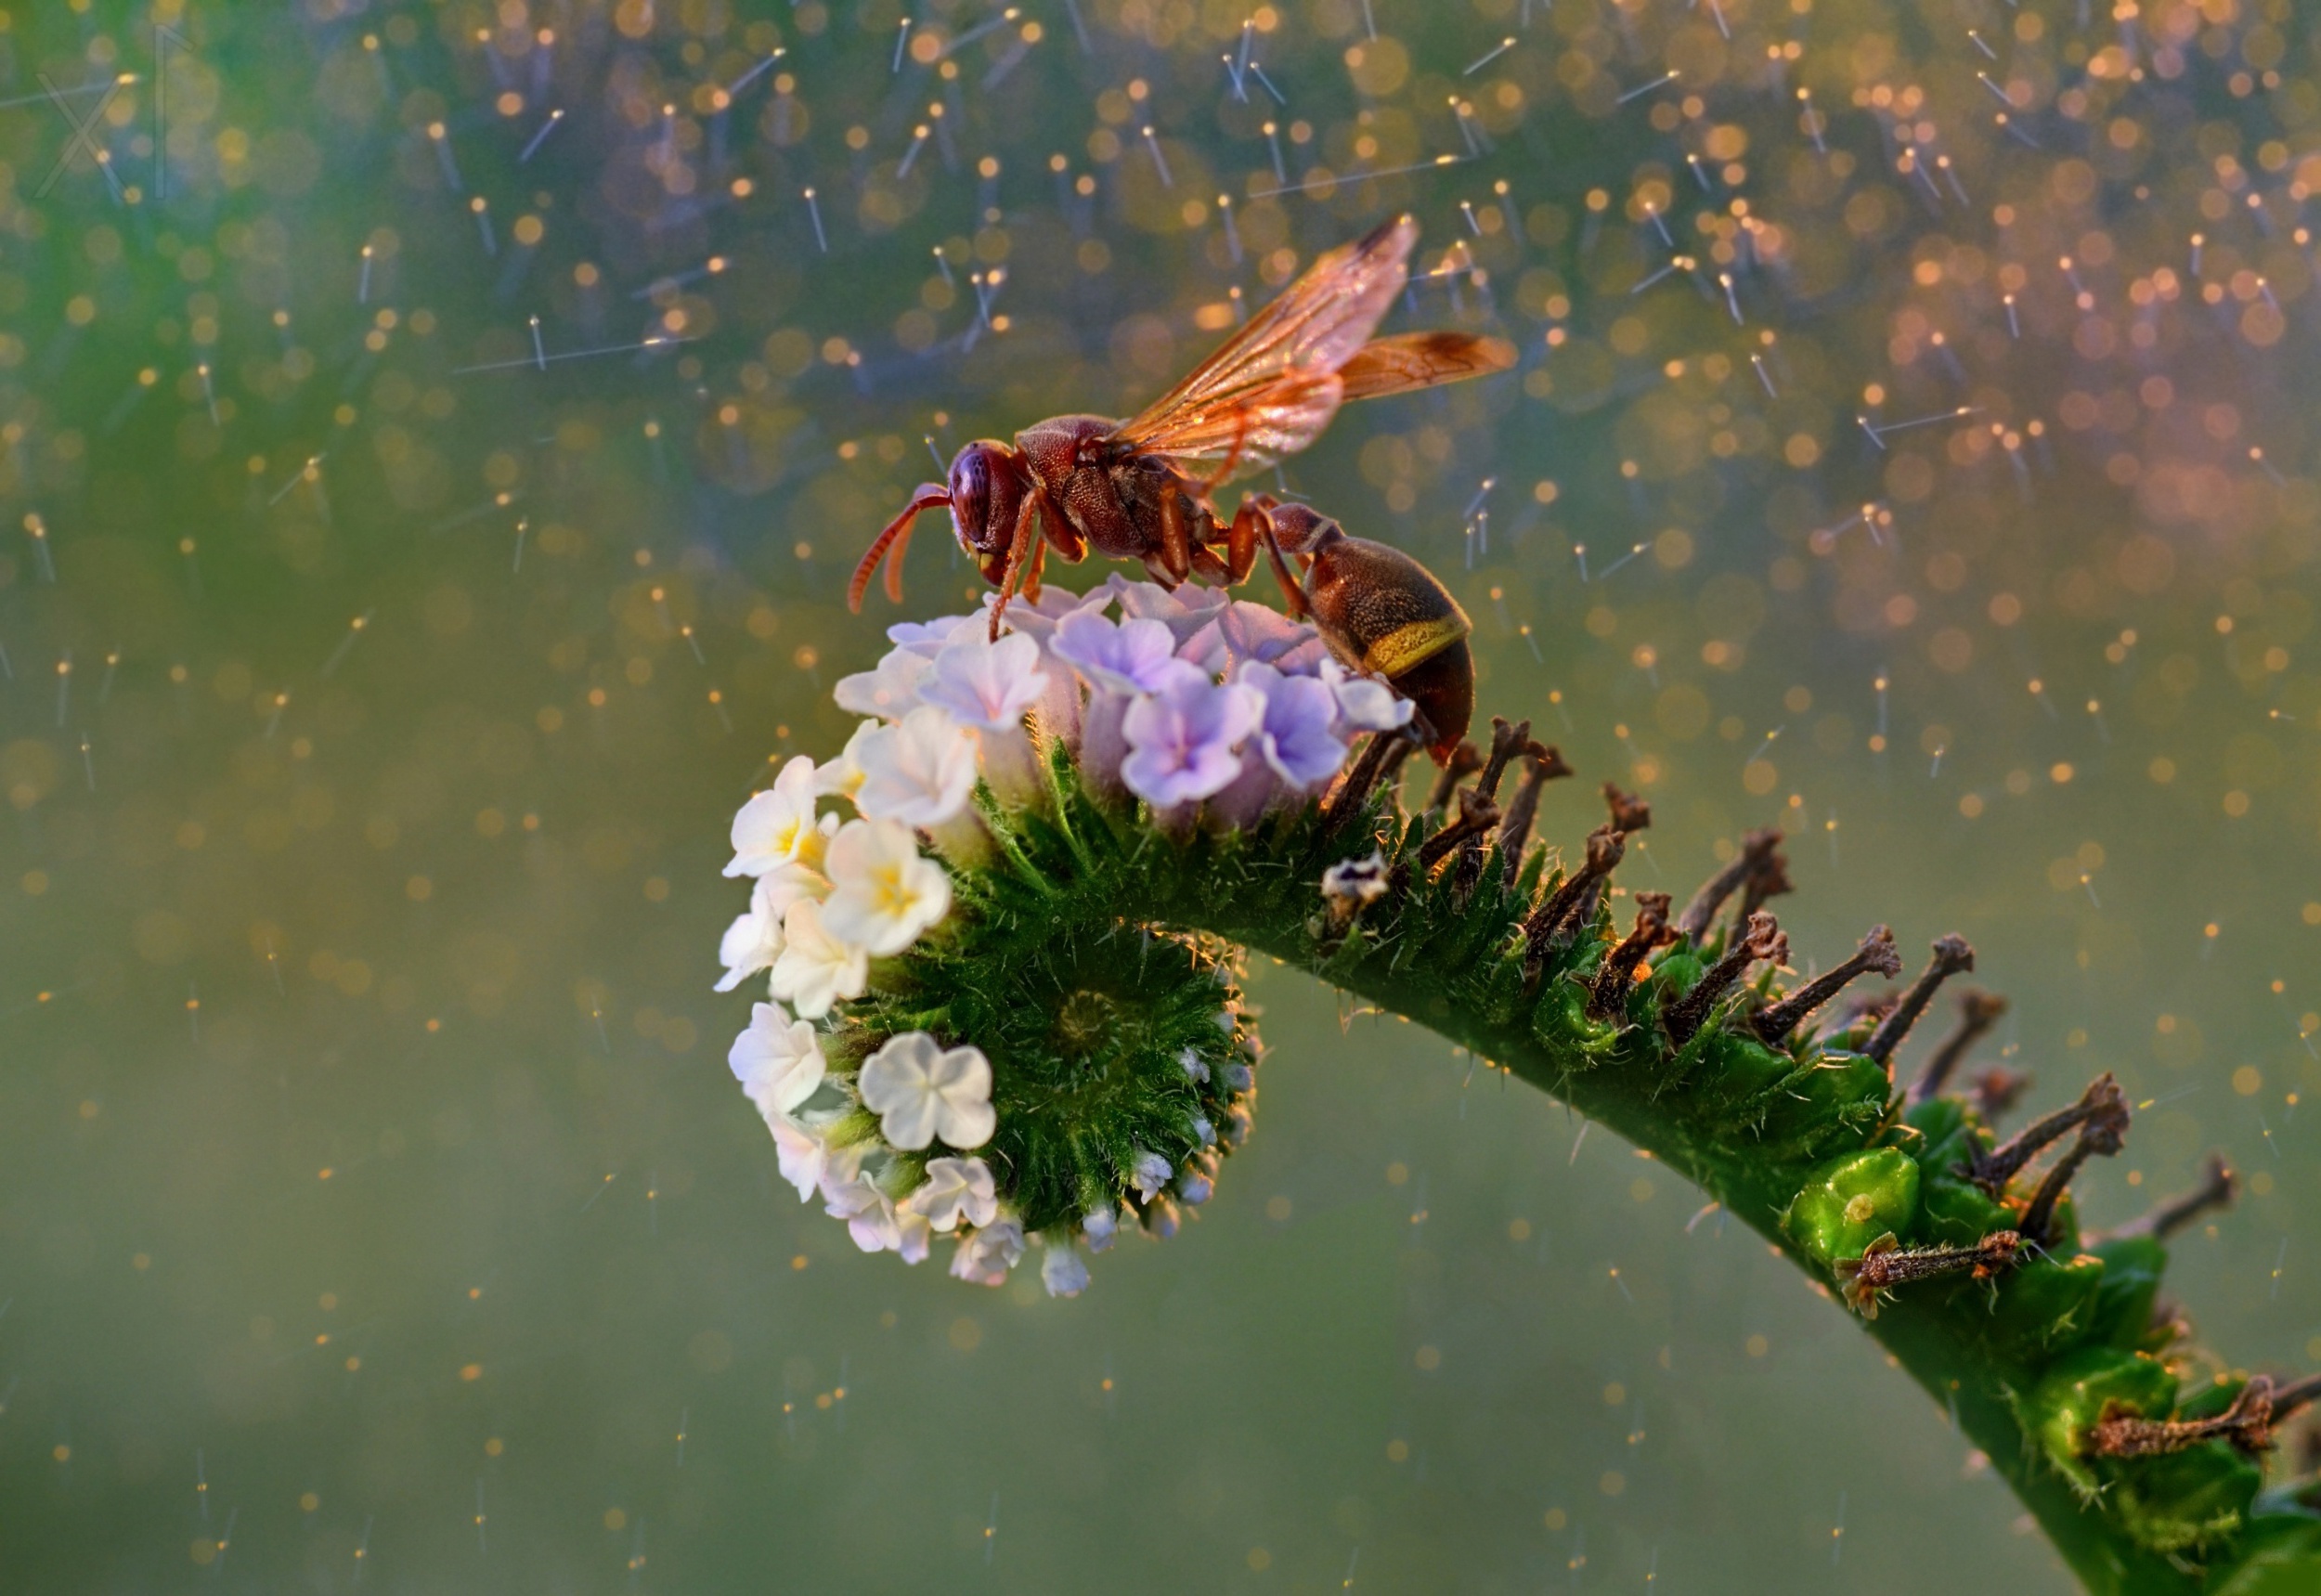 Colorful Wasps Insect Flowers Animals Plants Nature 2500x1719